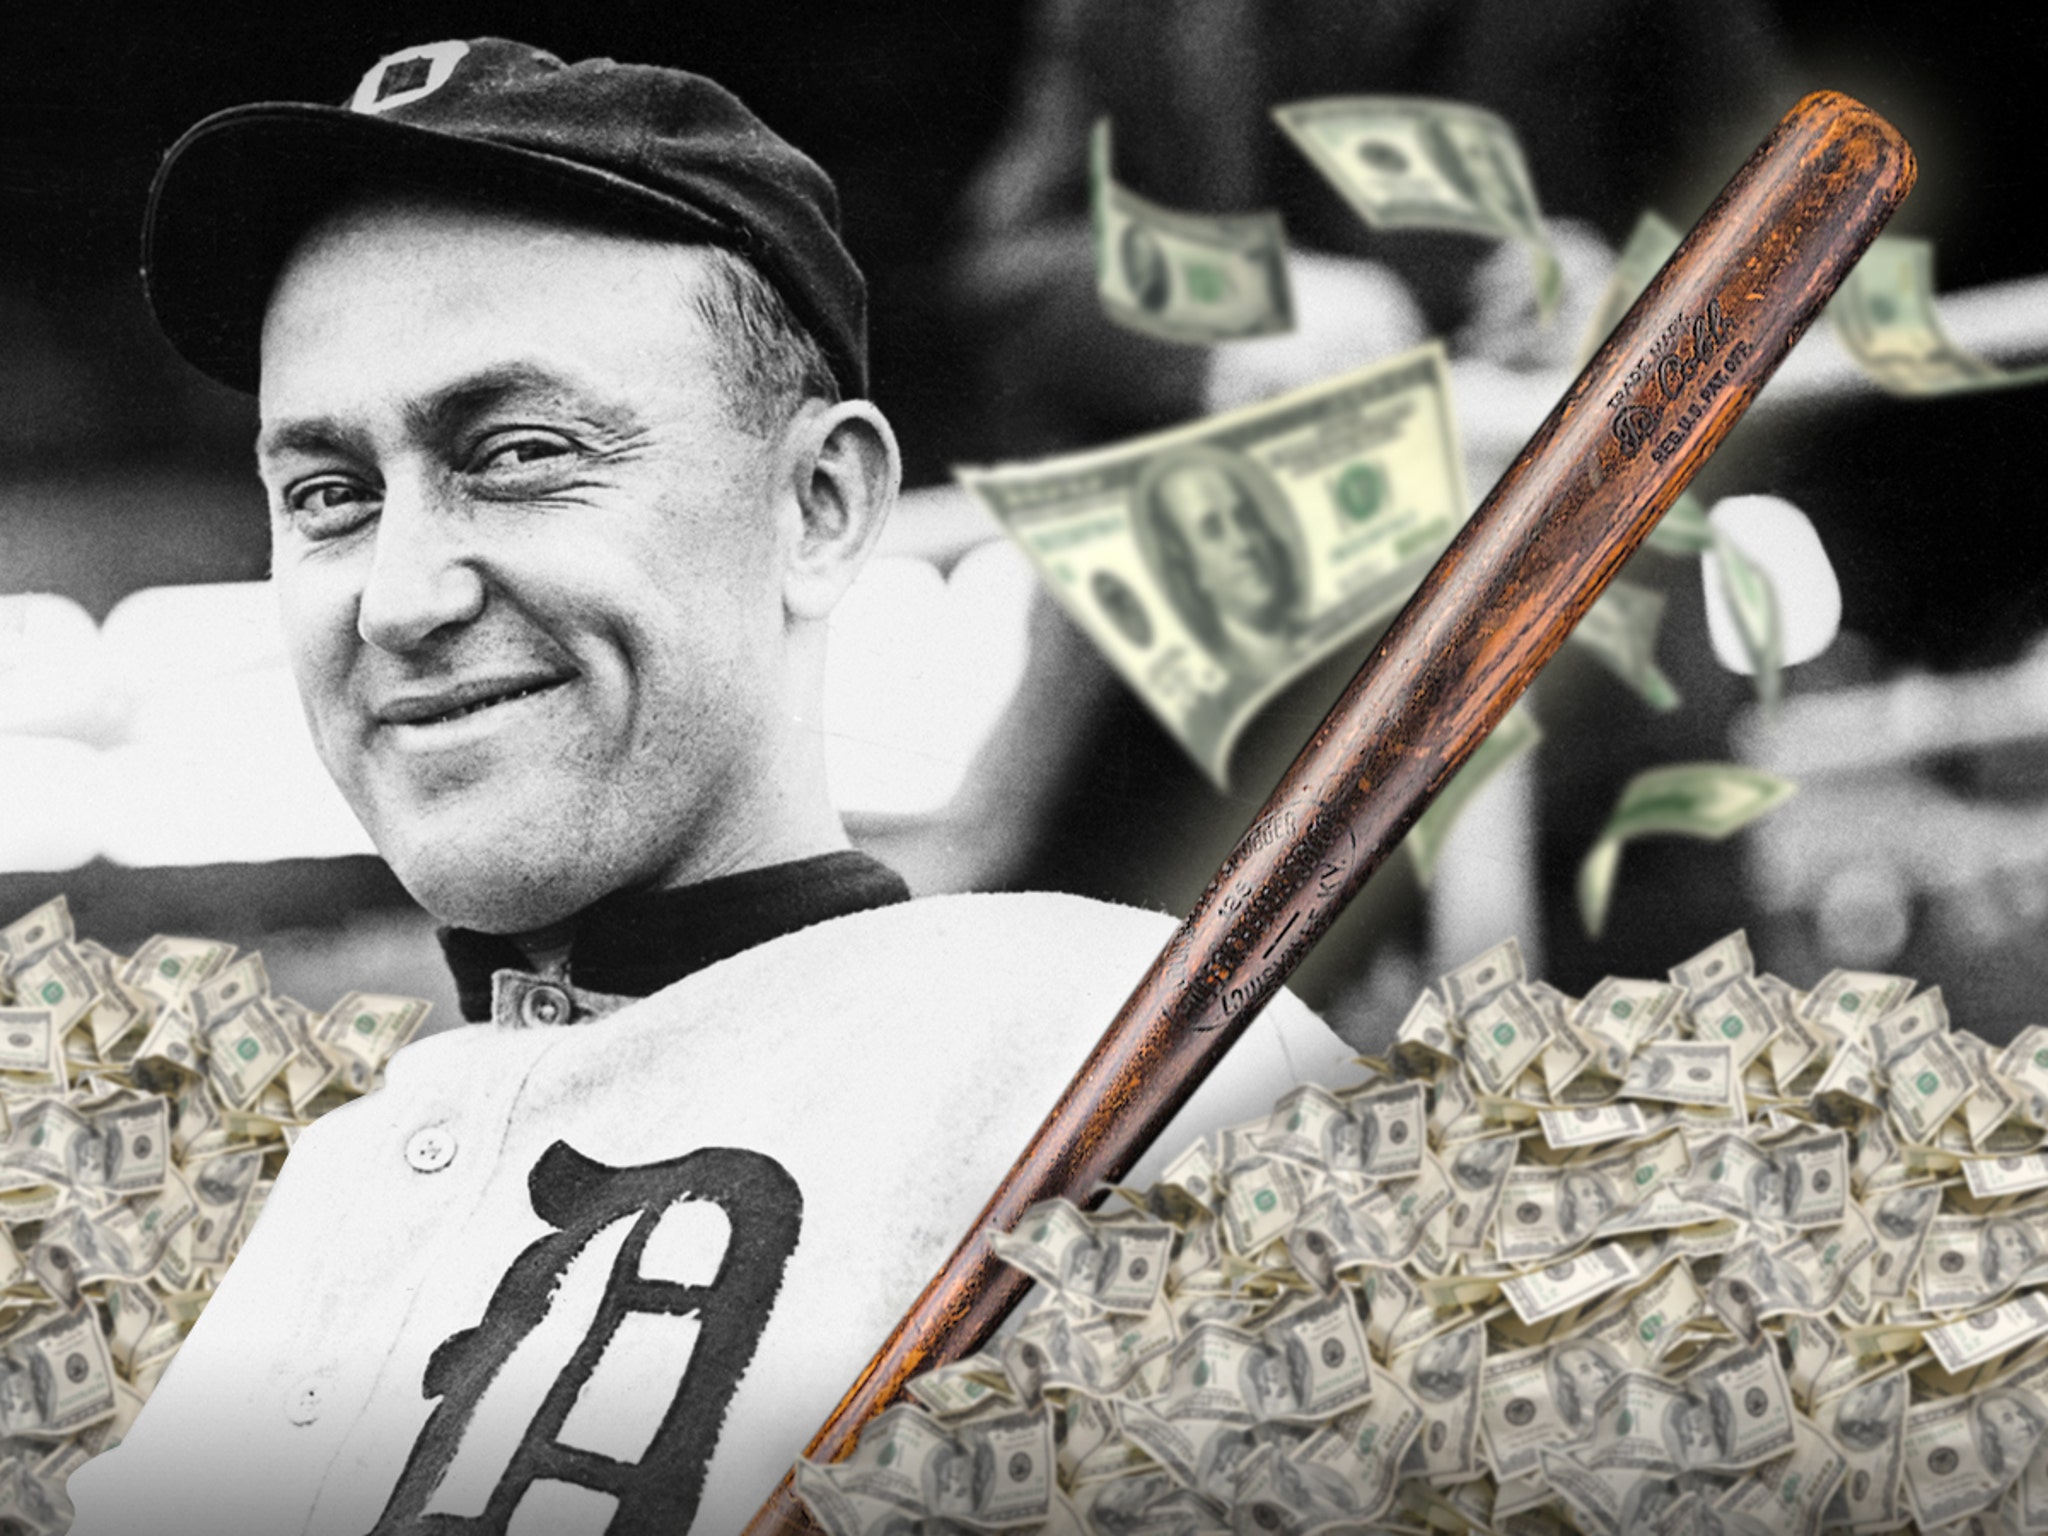 Collector Matches Ty Cobb Bat To Iconic 1913 Photograph